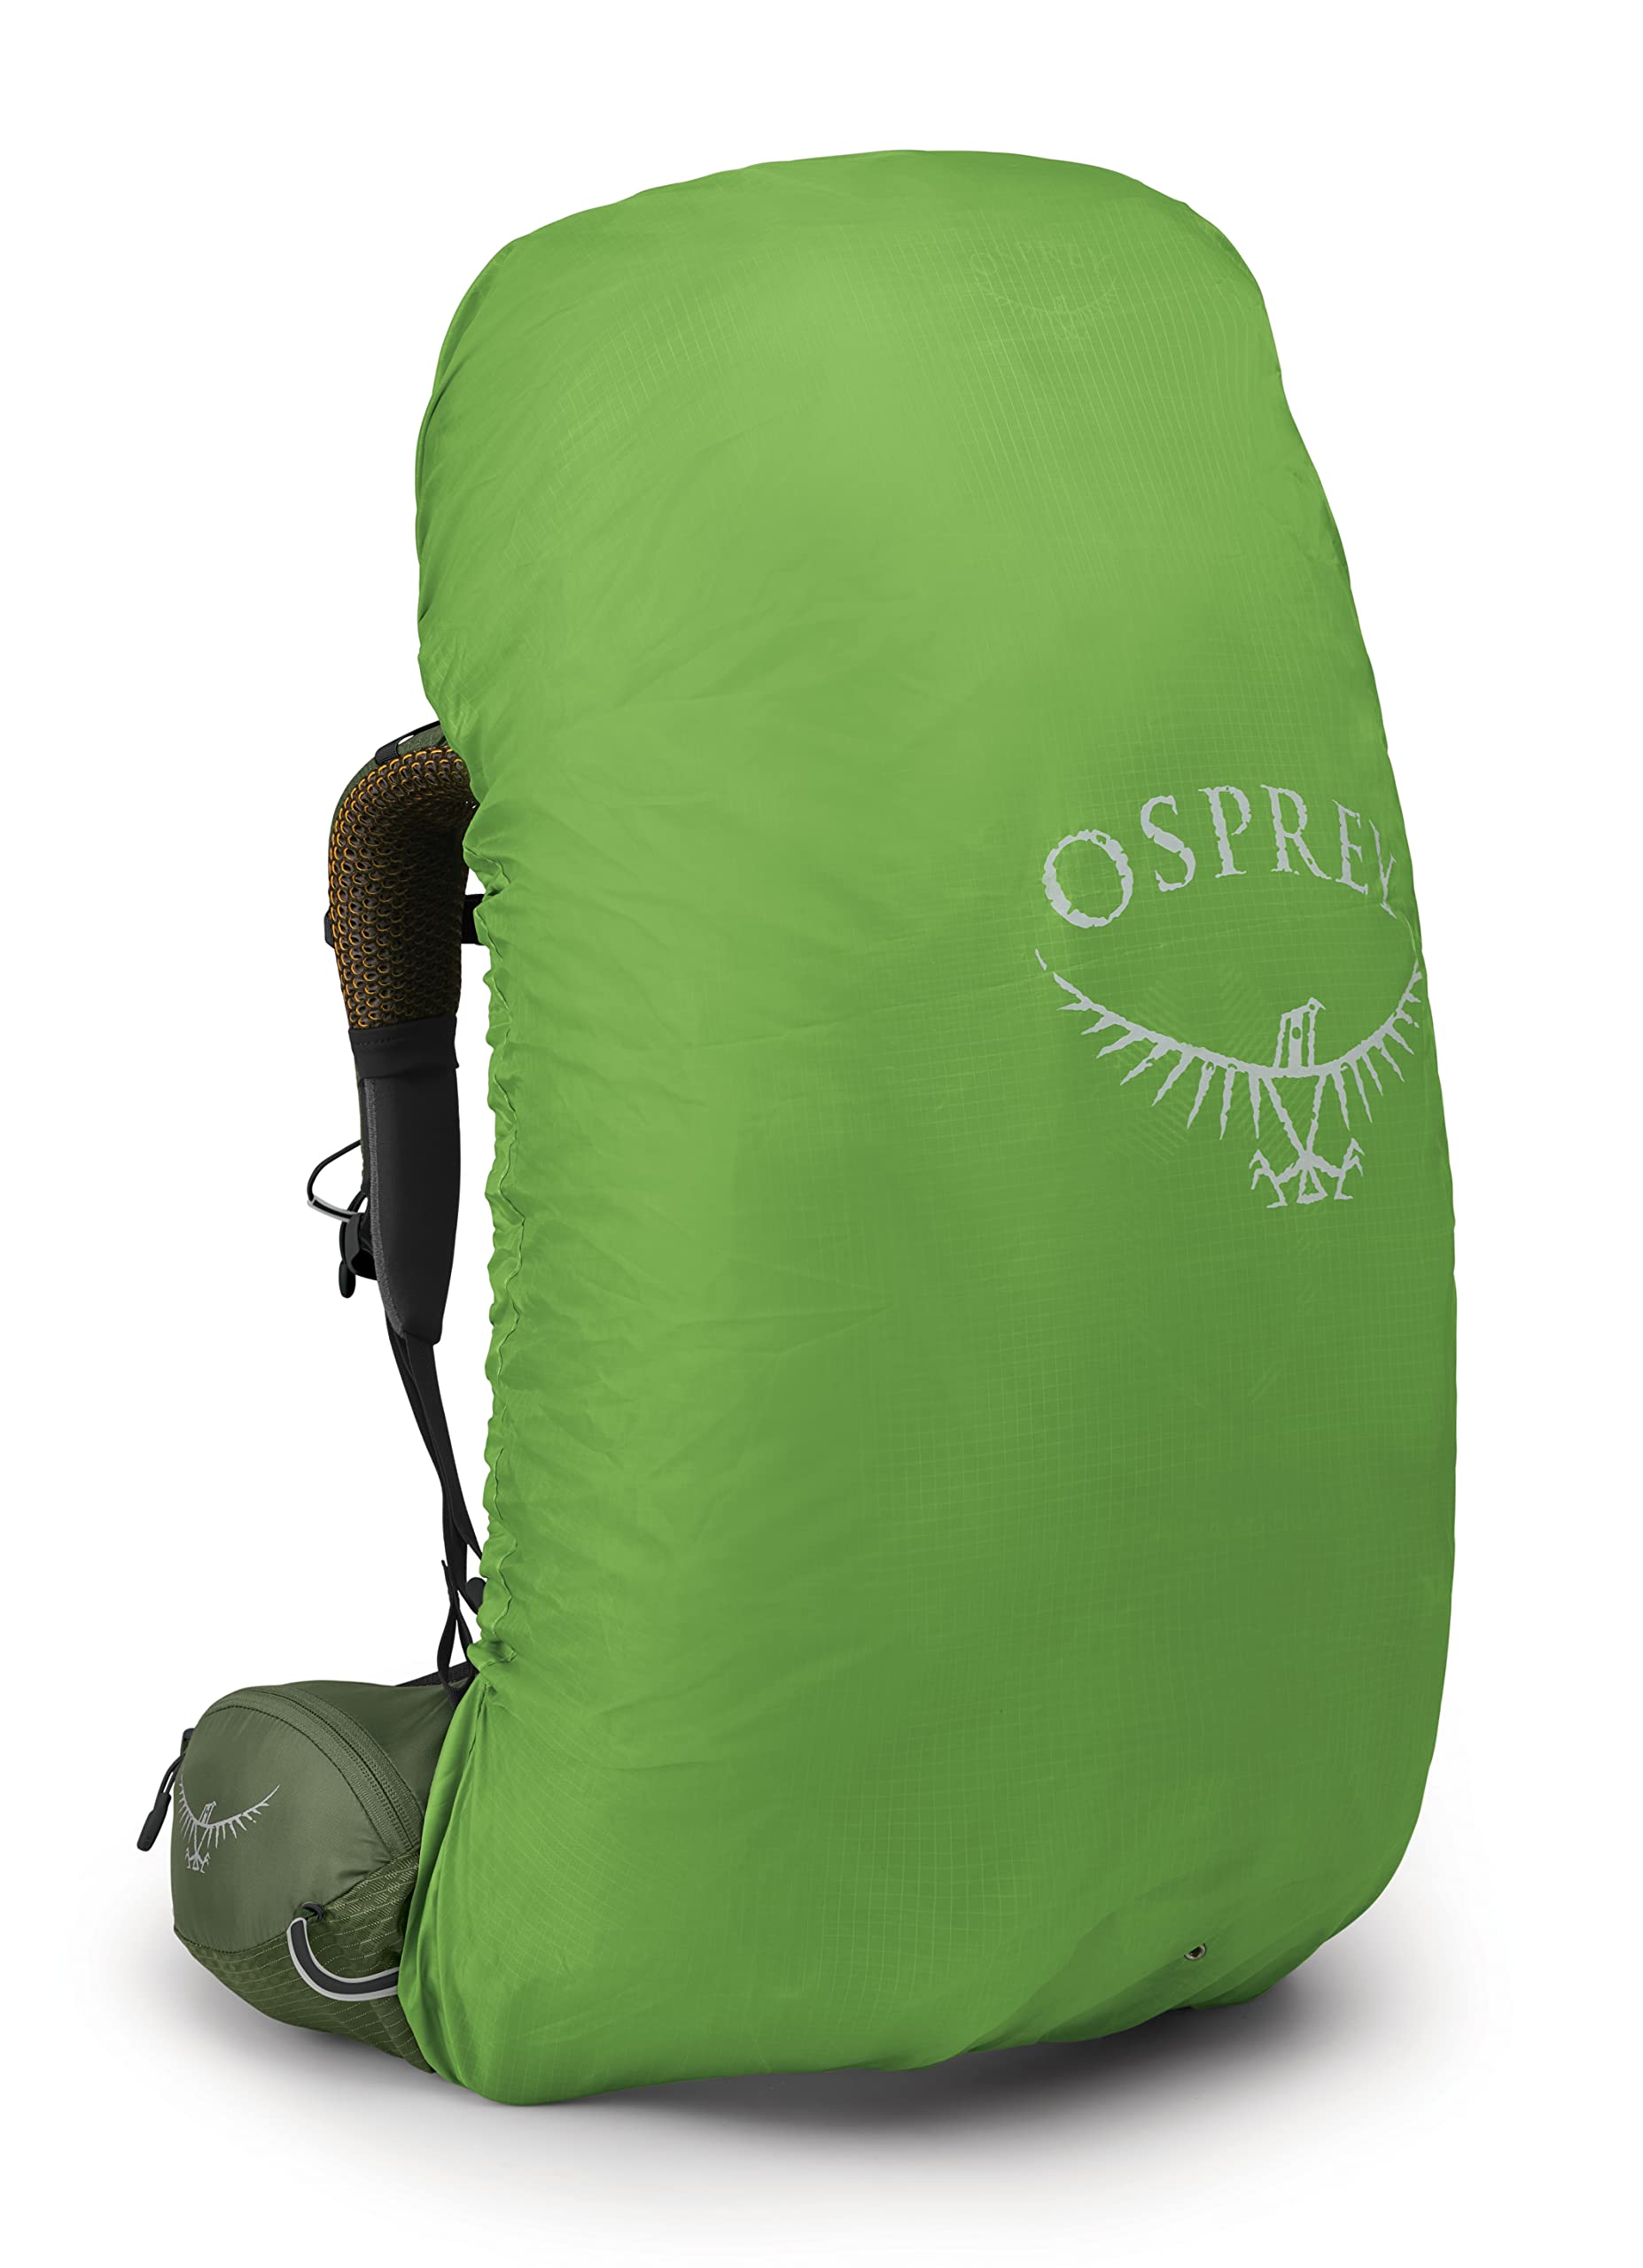 Osprey Atmos AG 65L Men's Backpacking Backpack, Mythical Green, Large/X-Large